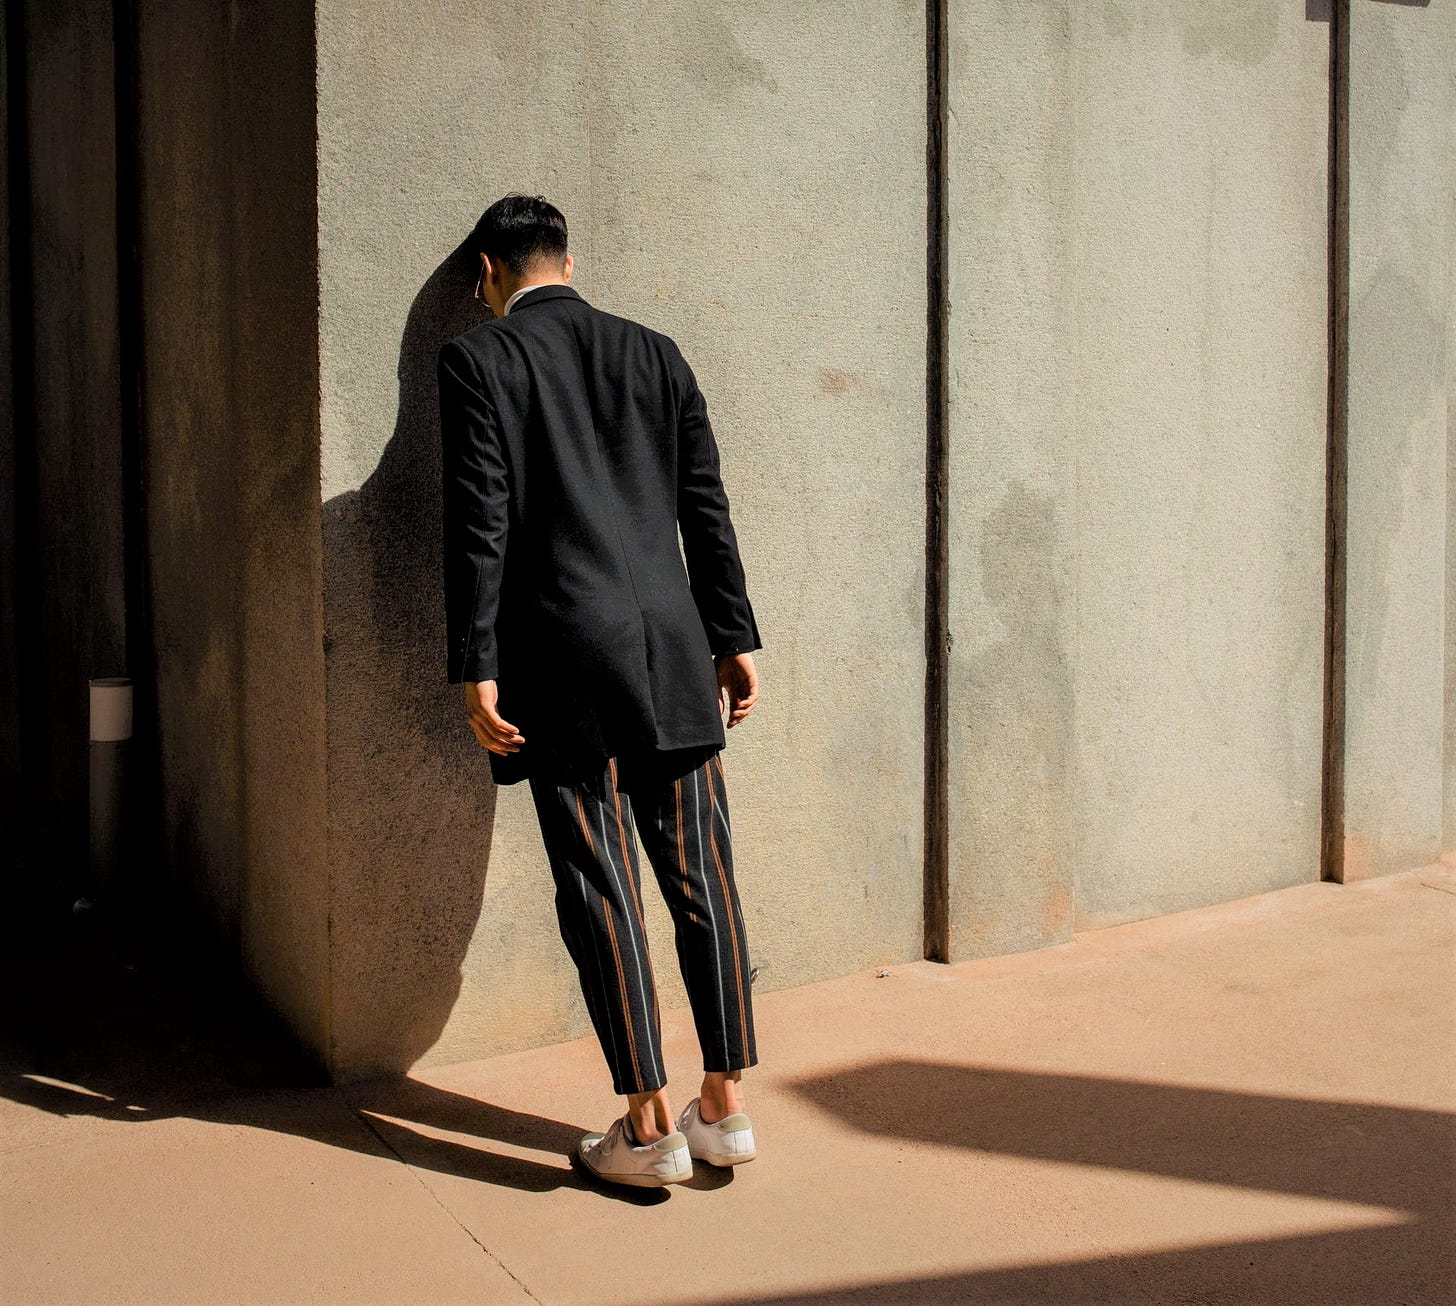 man wearing long sleeve dark top and striped pants leaning head against concrete wall